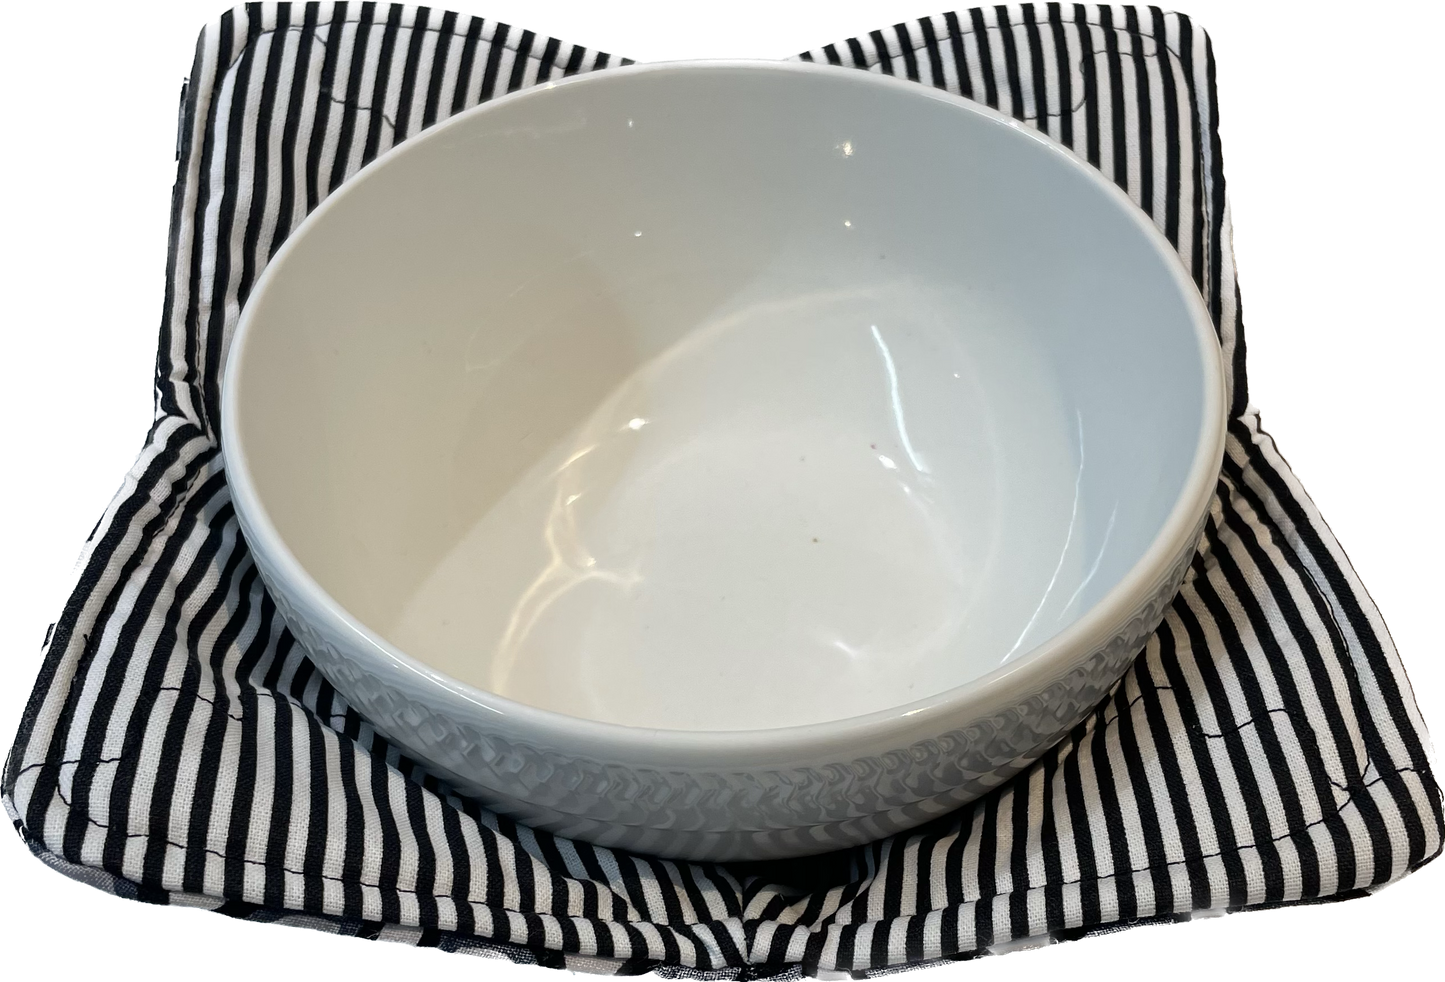 Soup Bowl Cozy Black and White Reversible Hot Soup Bowl Hug For Microwave Soup Bowl Cozy